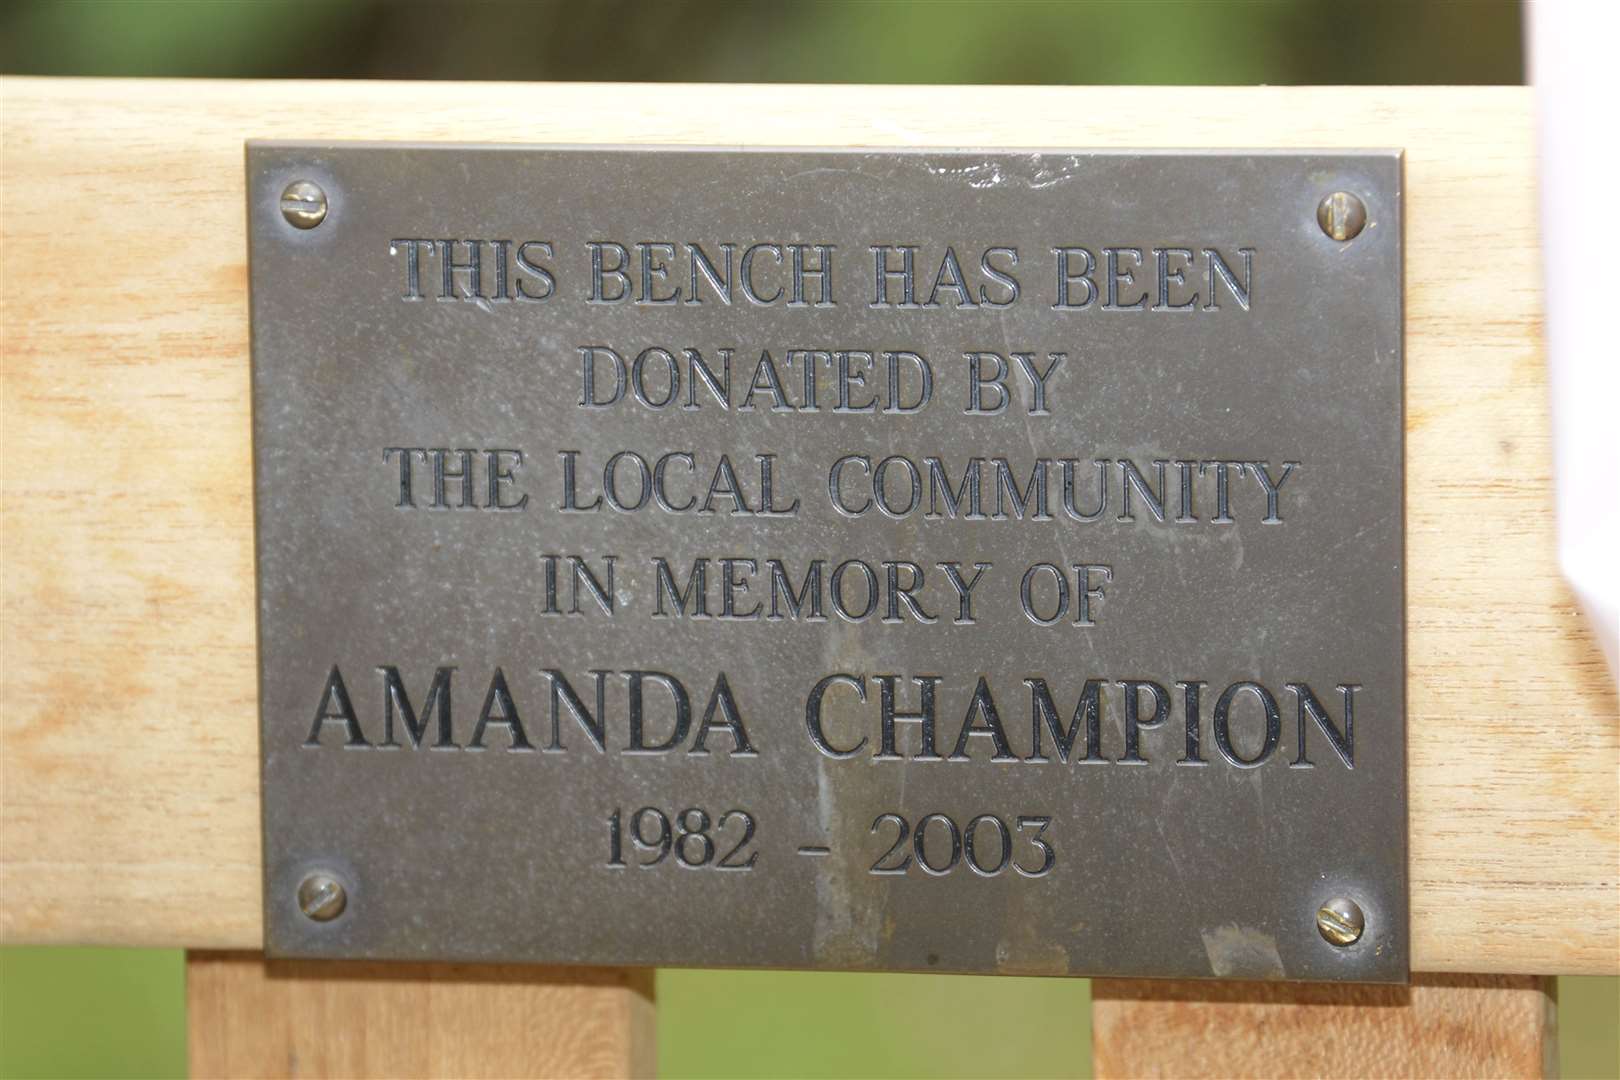 A bench was erected in memory of Amanda Champion in Willesborough